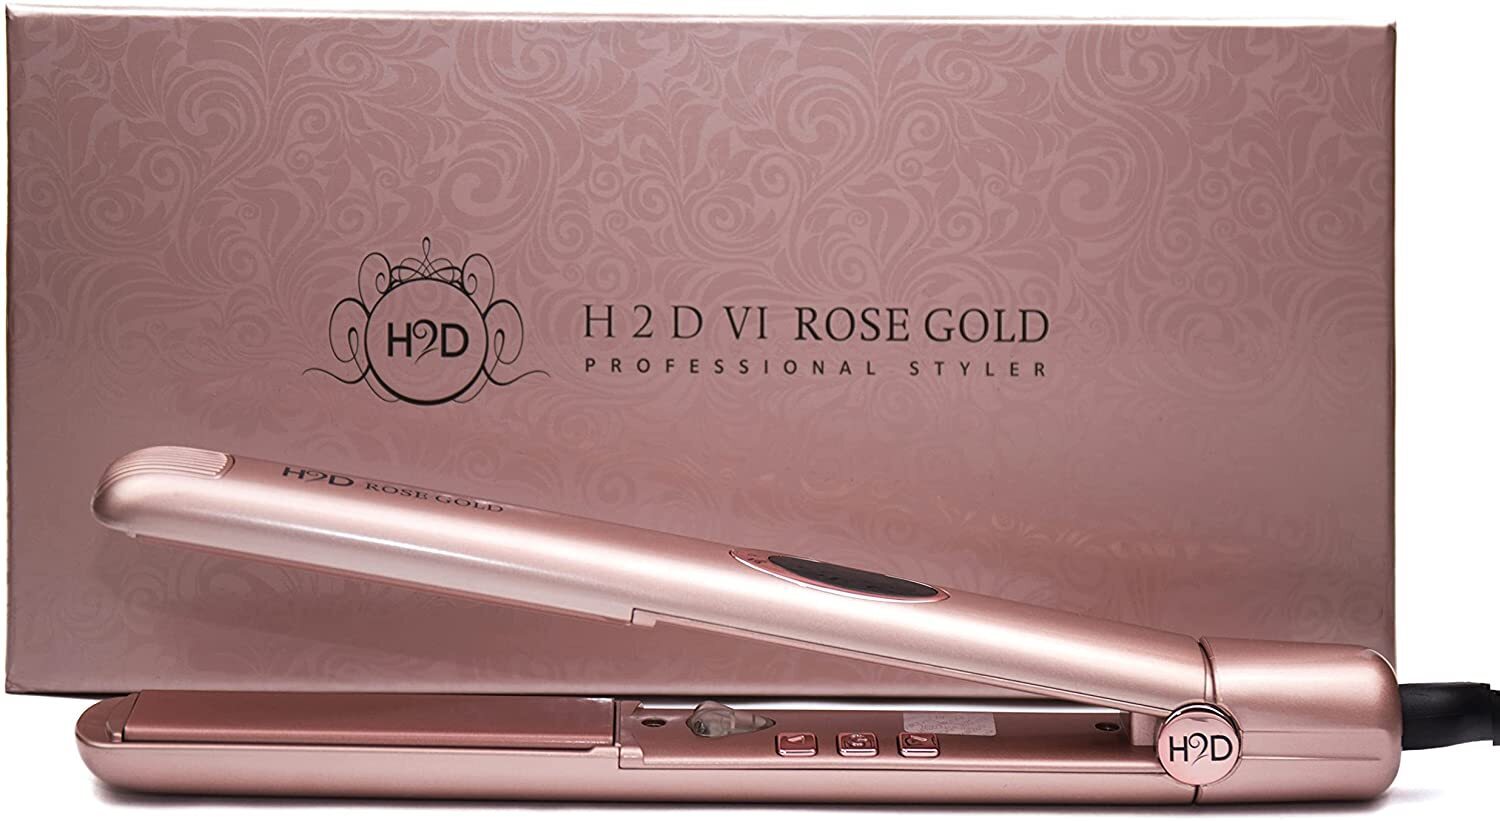 H2D Hair 2 Day Hair Straightener Styler Styling Iron Linear II Rose Gold 230 Degree